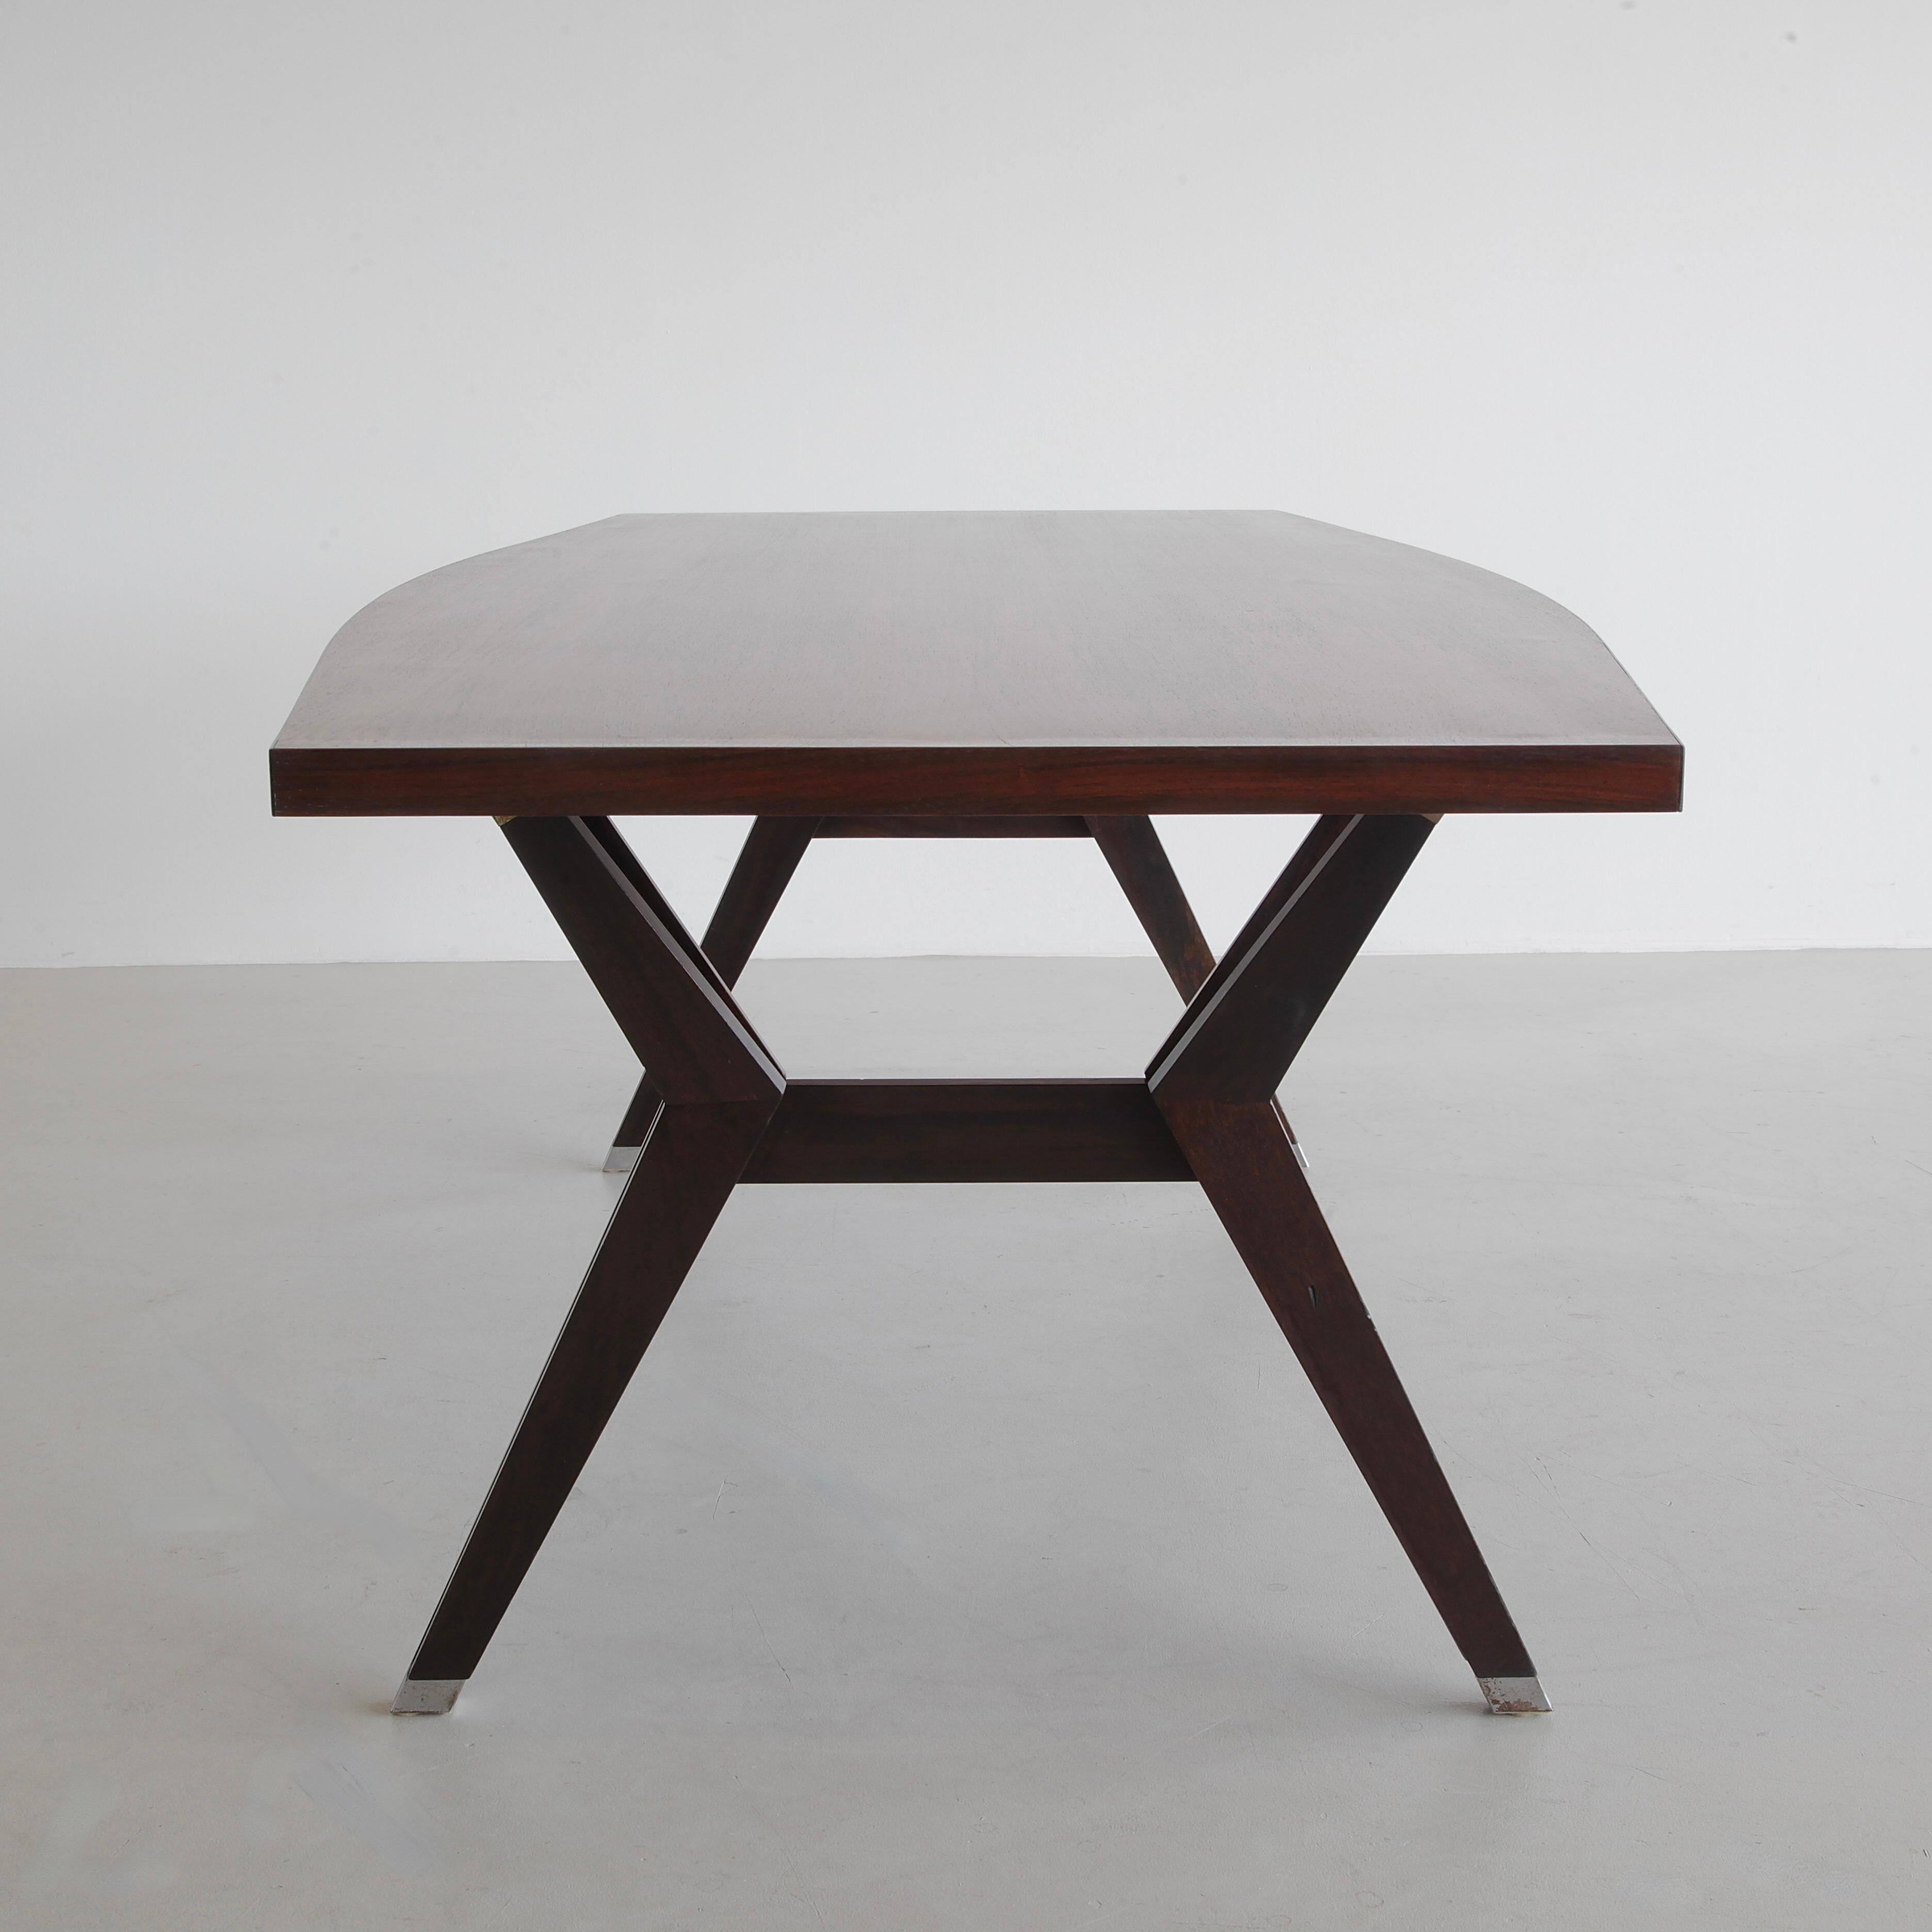 Table 'Tolomeo' designed by Ennio Fazioli. Italy, MIM Roma, 1963.

Teak table designed by Fazioli with elegant wood veneer top. Solid wood U-shaped legs with twinned arms, and square metal feet. Stunning! This desk was extensively re-designed by